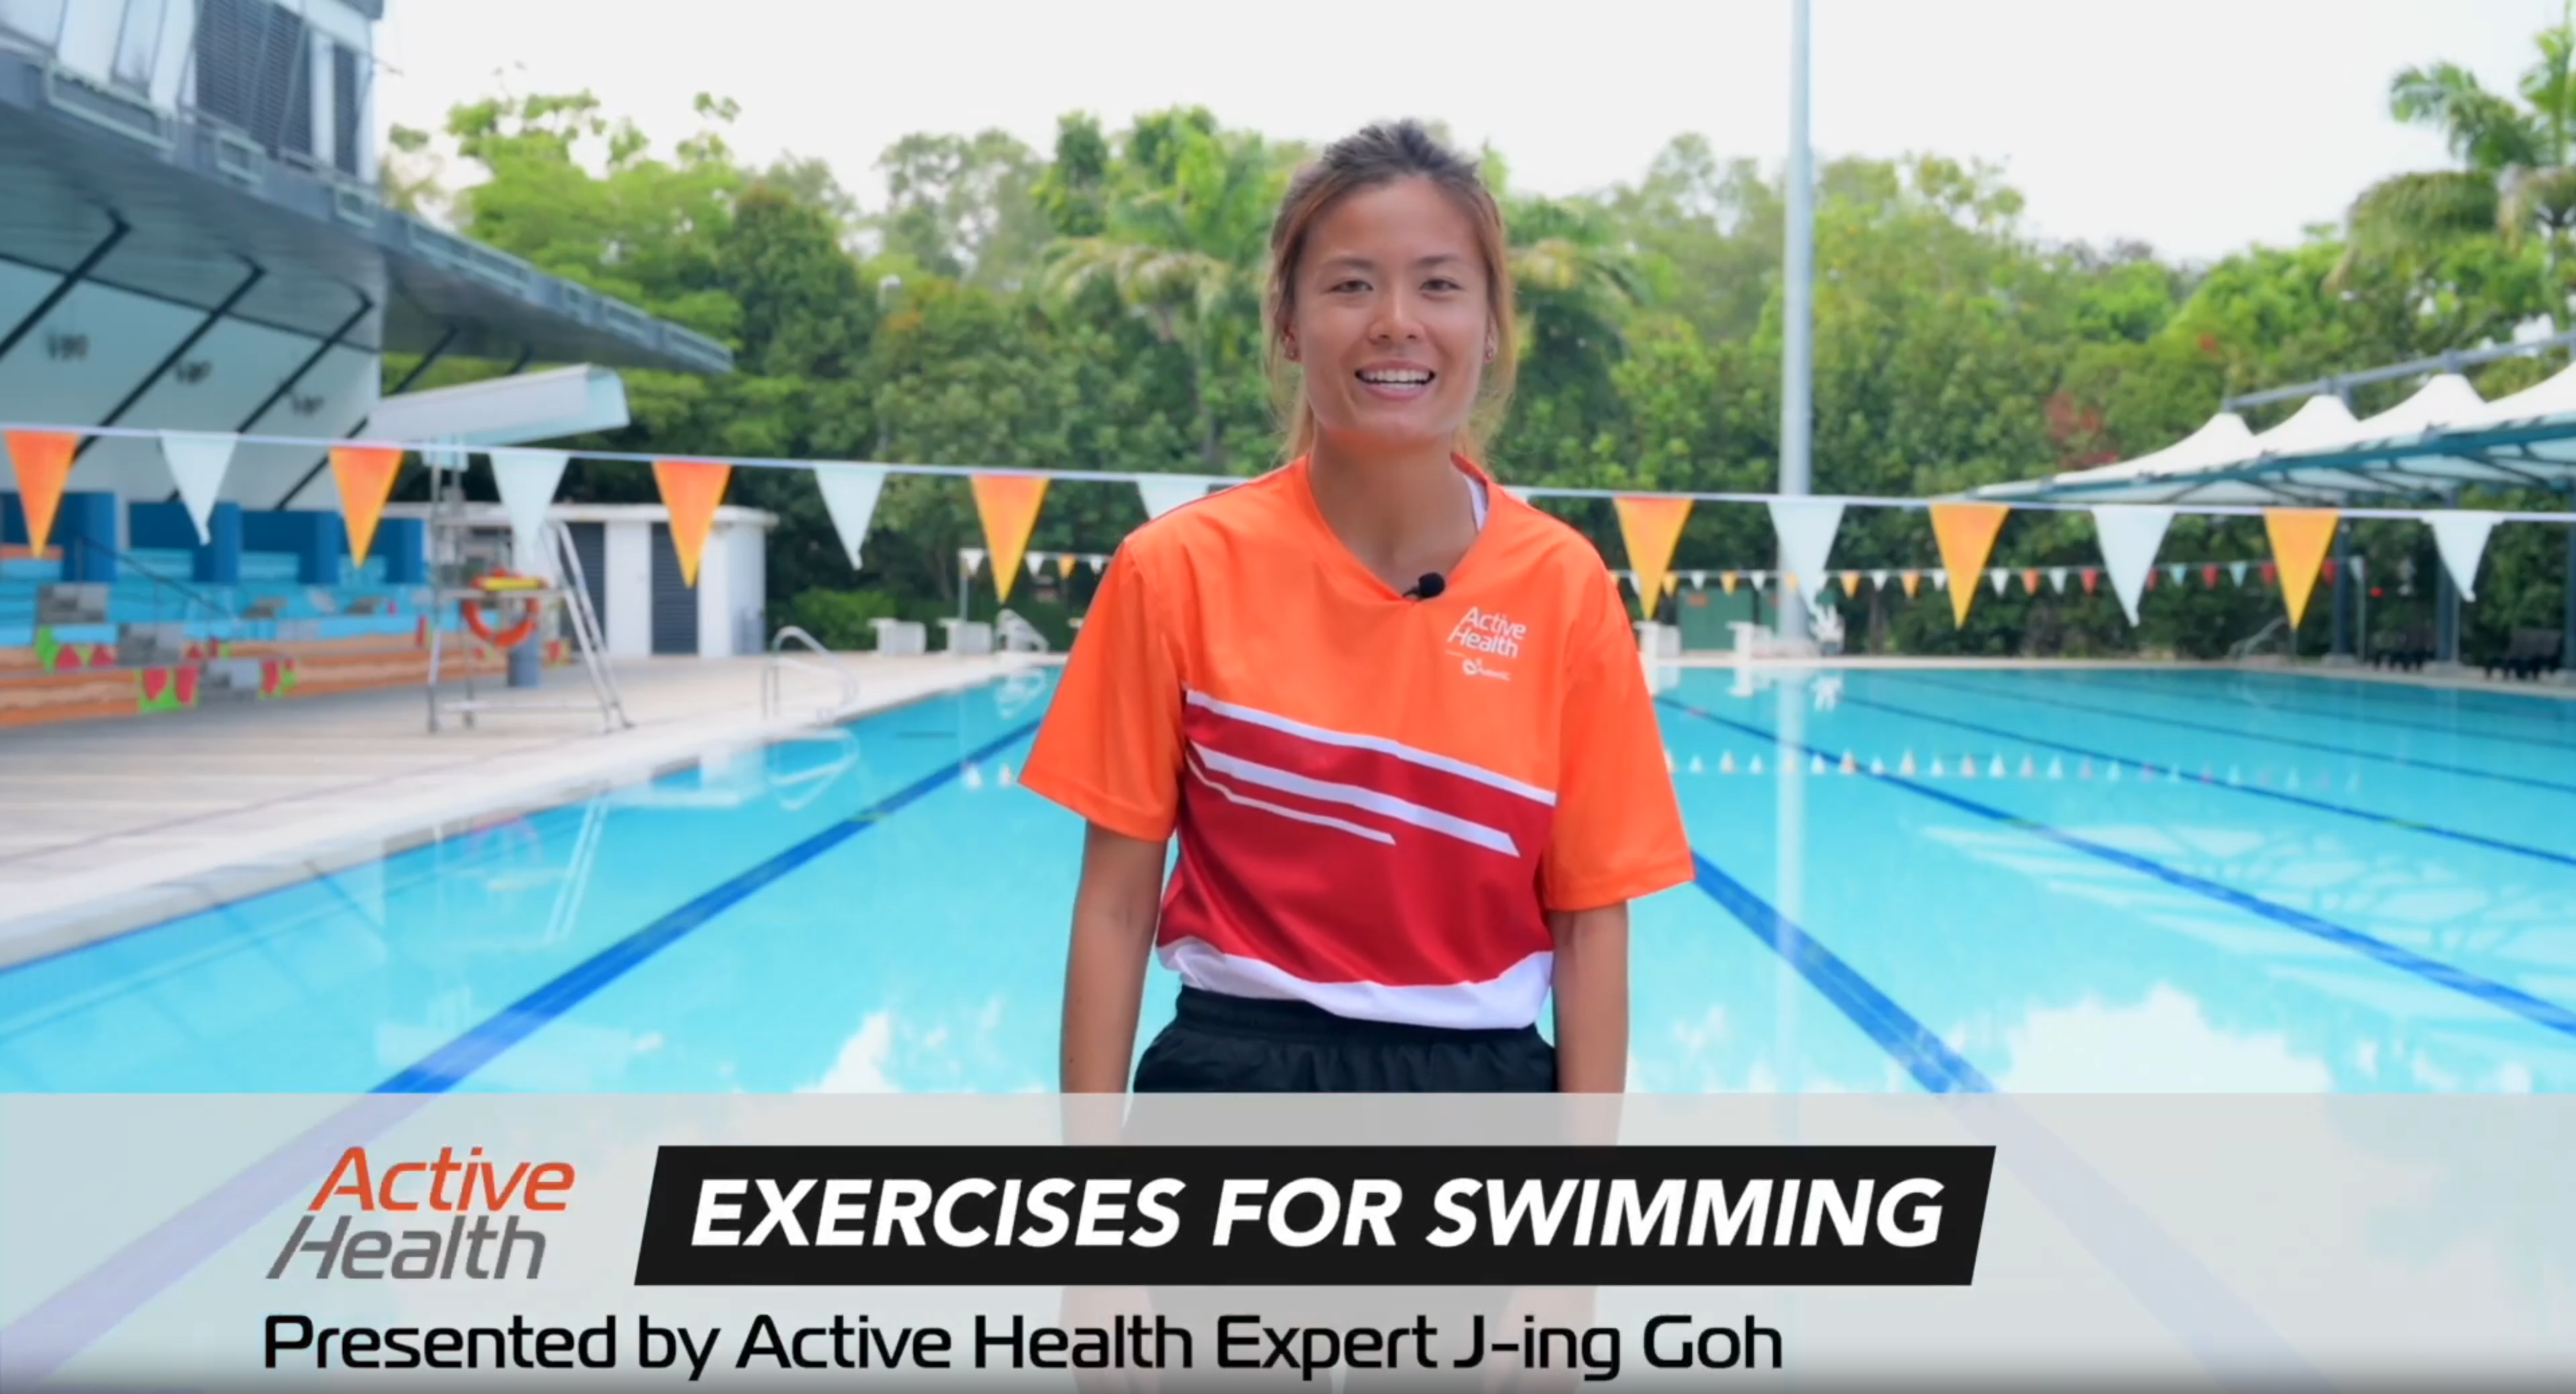 Ep 3 - 5 Simples Exercises To Improve Your Swimming Skills | Active Health